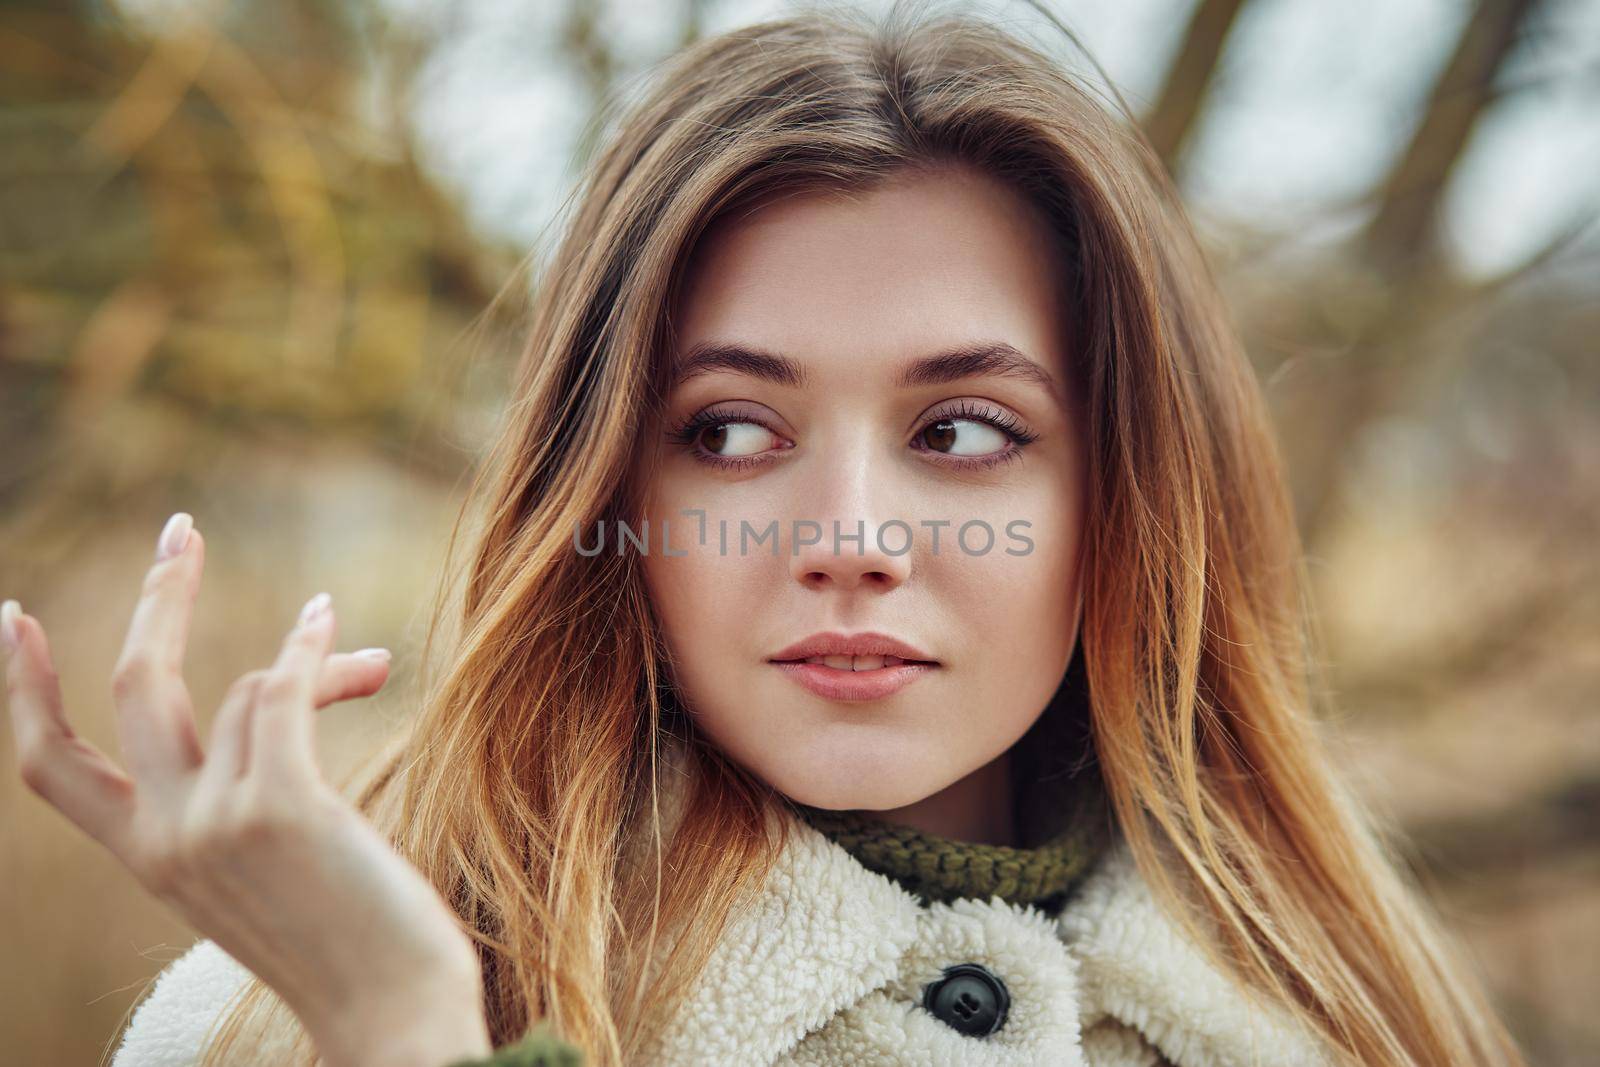 Beautiful woman hair fluttering in the wind. Smiling woman laughing on the street cheerfully. Lovely young lady feeling happy